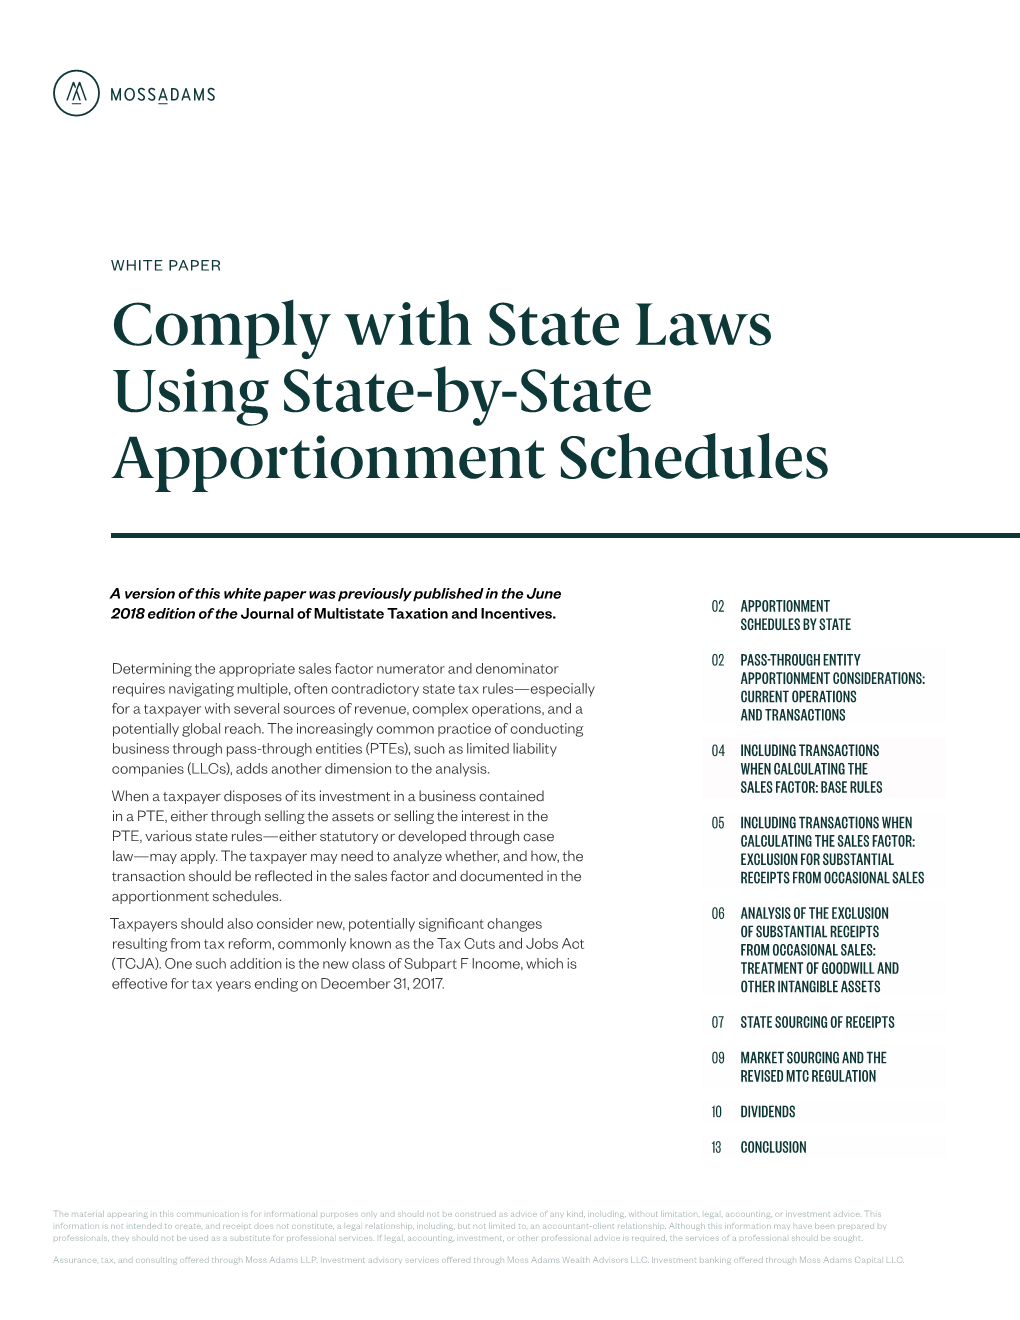 Comply with State Laws Using State-By-State Apportionment Schedules